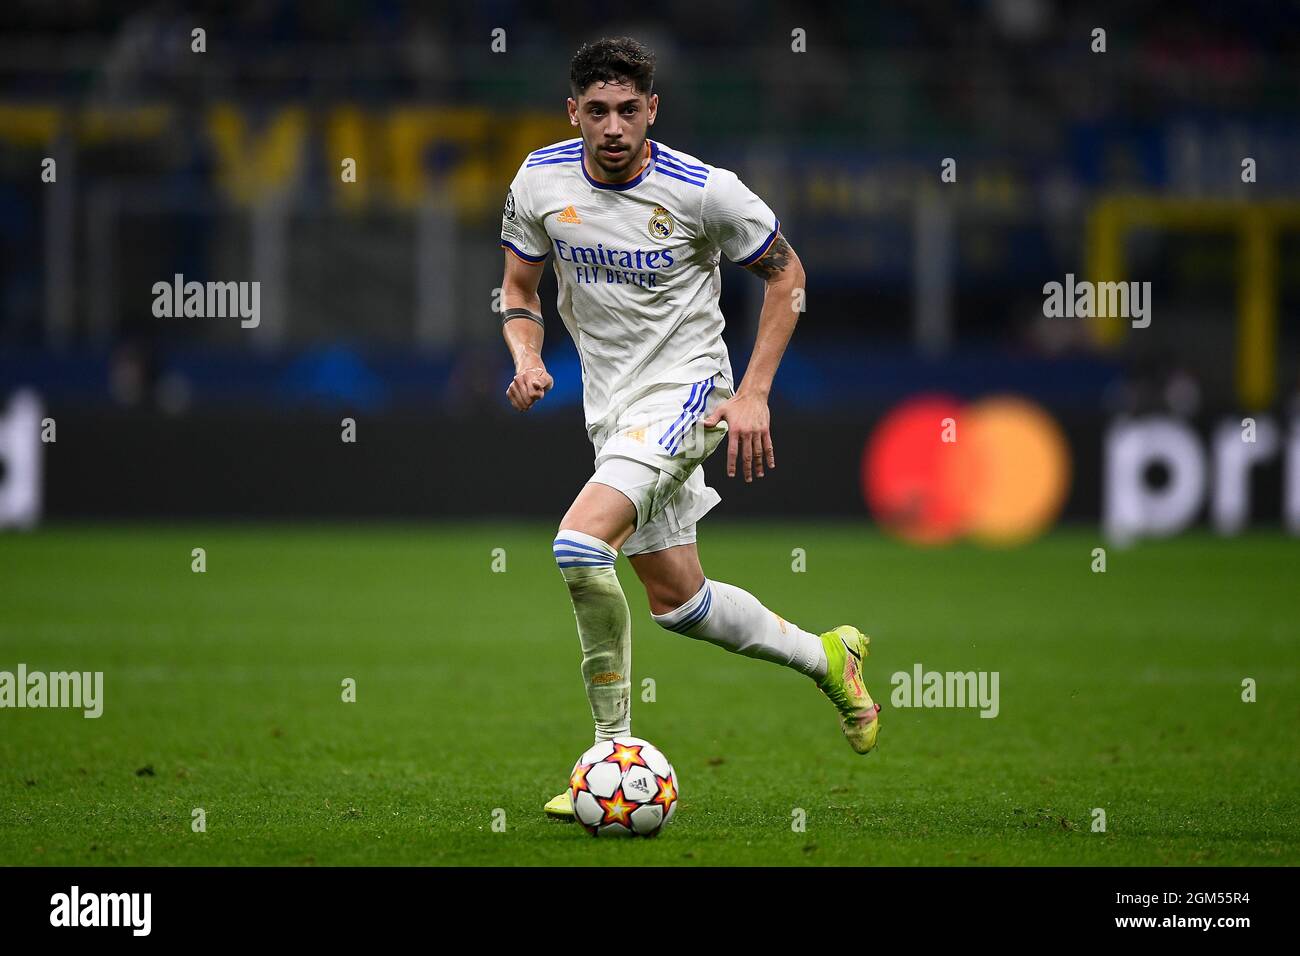 Milan, Italy. 15 September 2021. Federico Valverde of Real Madrid CF in action during the UEFA Champions League football match between FC Internazionale and Real Madrid CF. Credit: Nicolò Campo/Alamy Live News Stock Photo